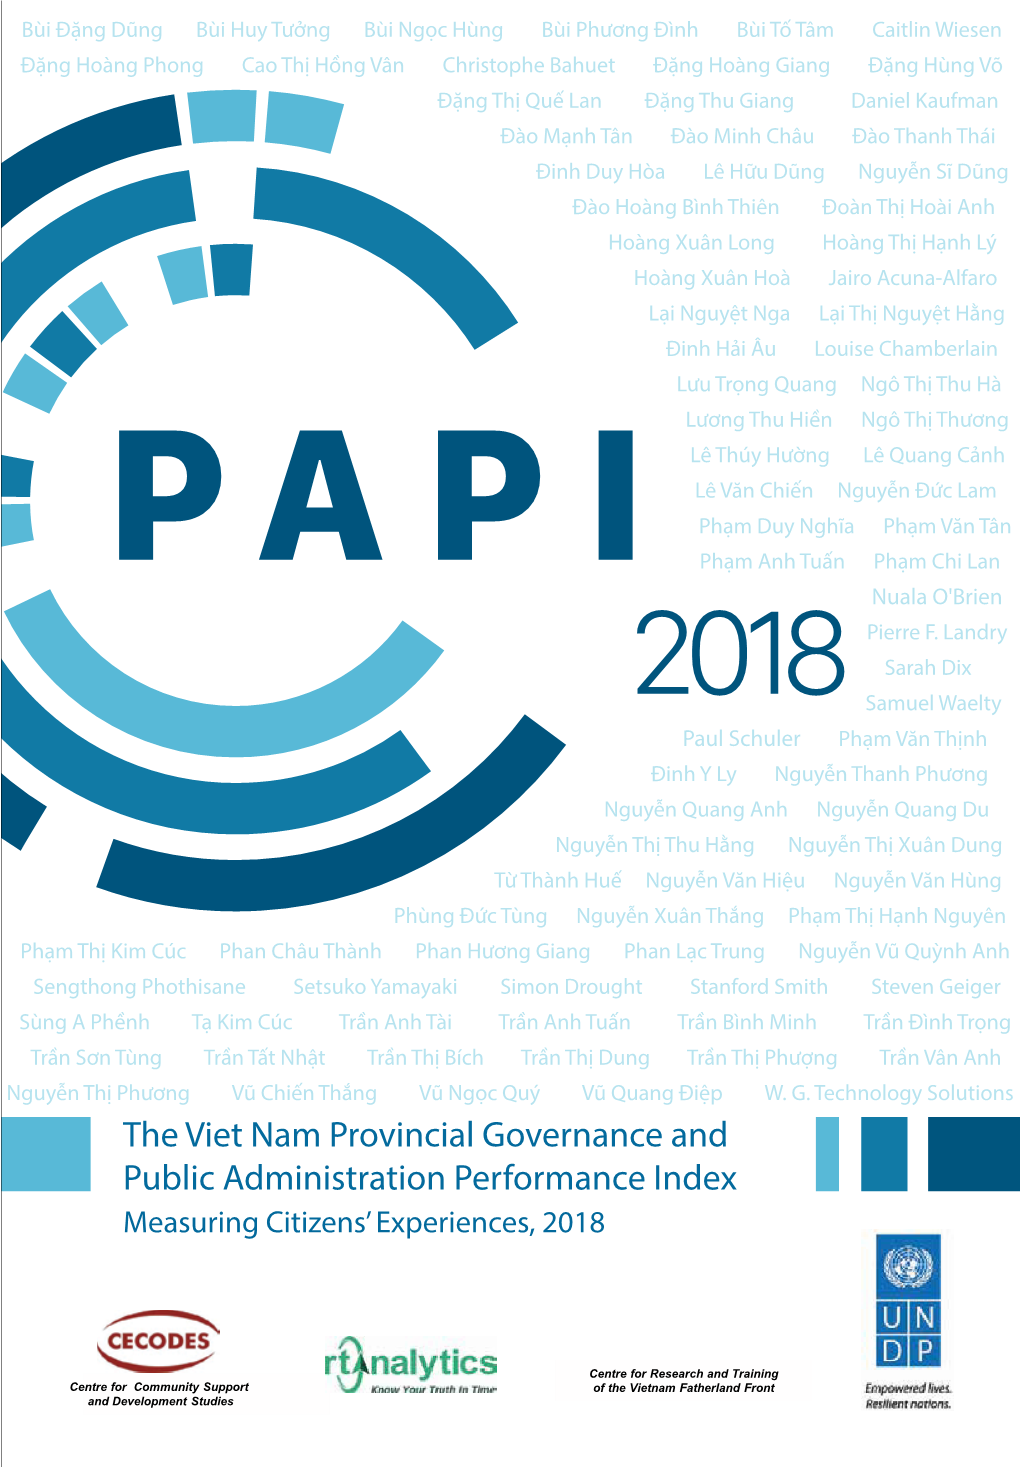 The Viet Nam Provincial Governance and Public Administration Performance Index Measuring Citizens’ Experiences, 2018